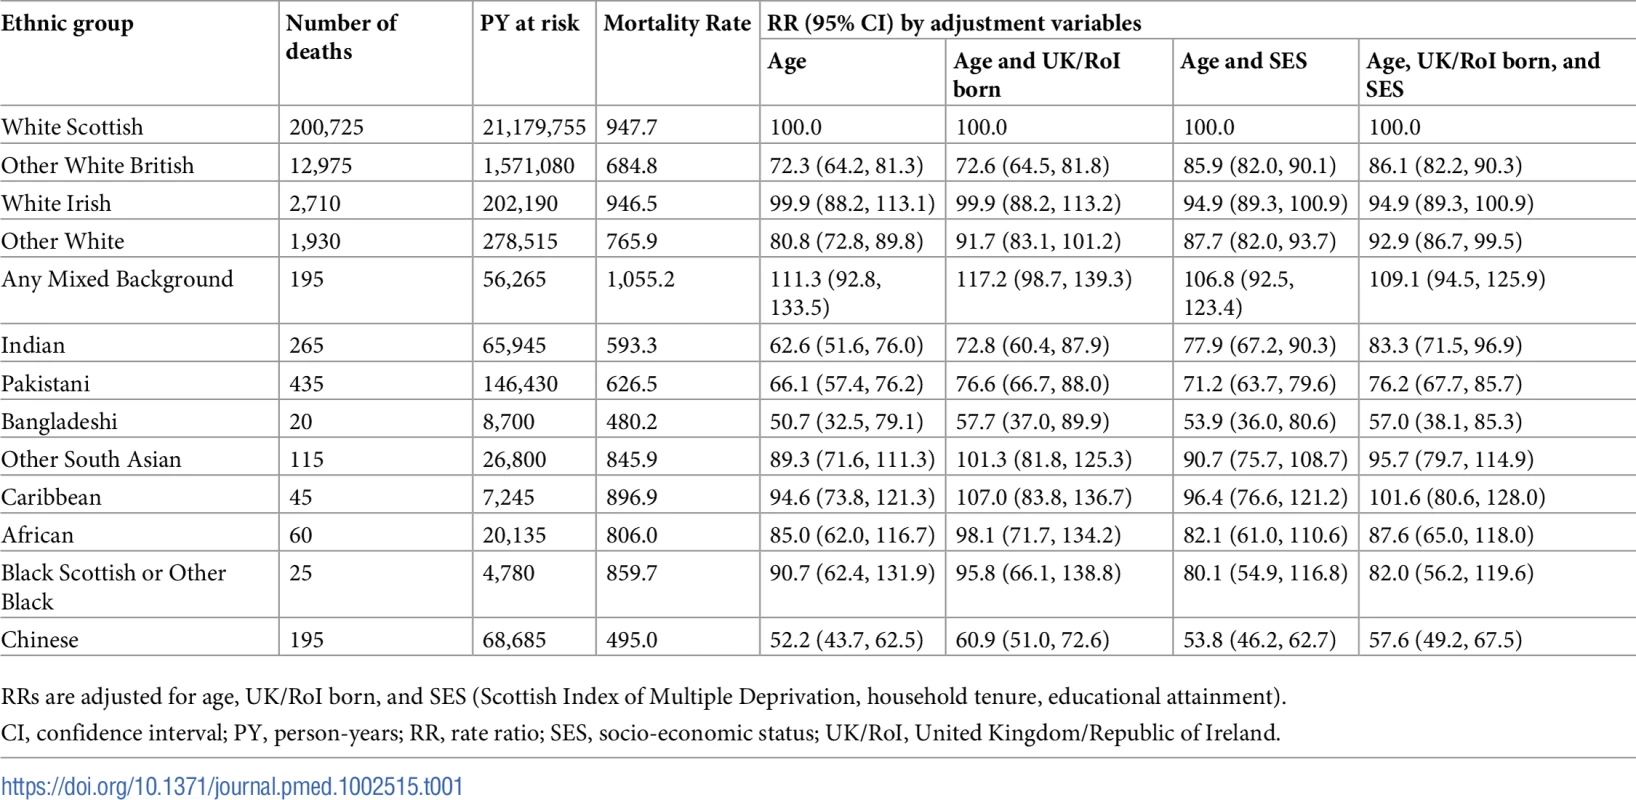 Age-adjusted mortality rates per 100,000 PY and RRs for all-cause mortality by ethnic group in males.